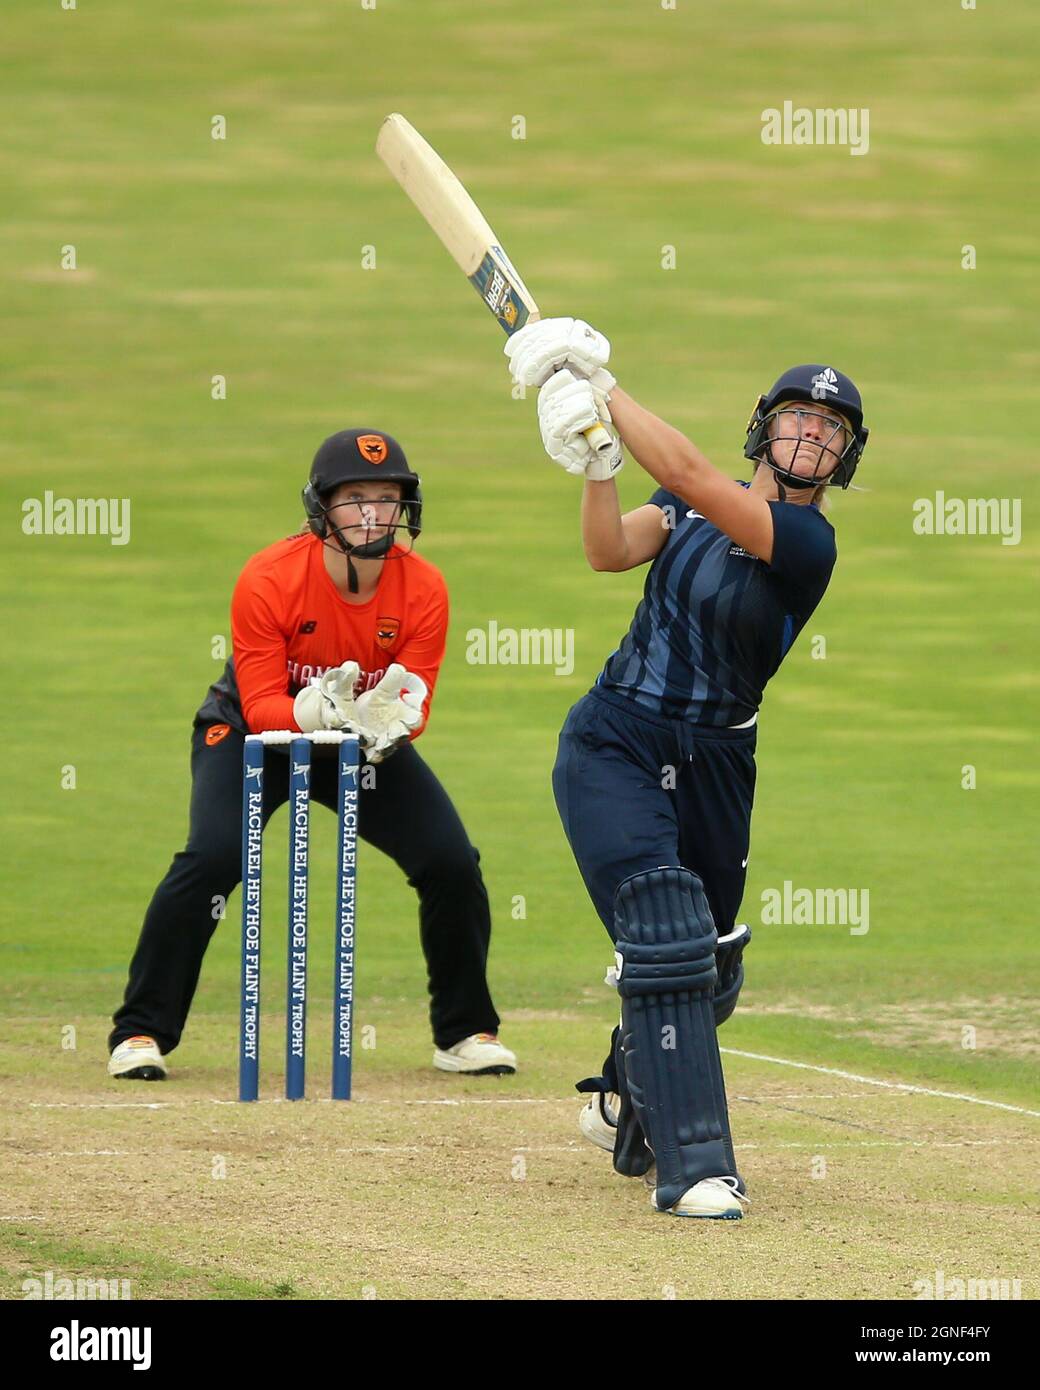 Southern Viper's Carla Rudd (left) and Northern Diamond's Ami Campbell during the Rachael Heyhoe Flint Trophy Final at The County Ground, Northampton. Picture date: Saturday September 25, 2021. Stock Photo